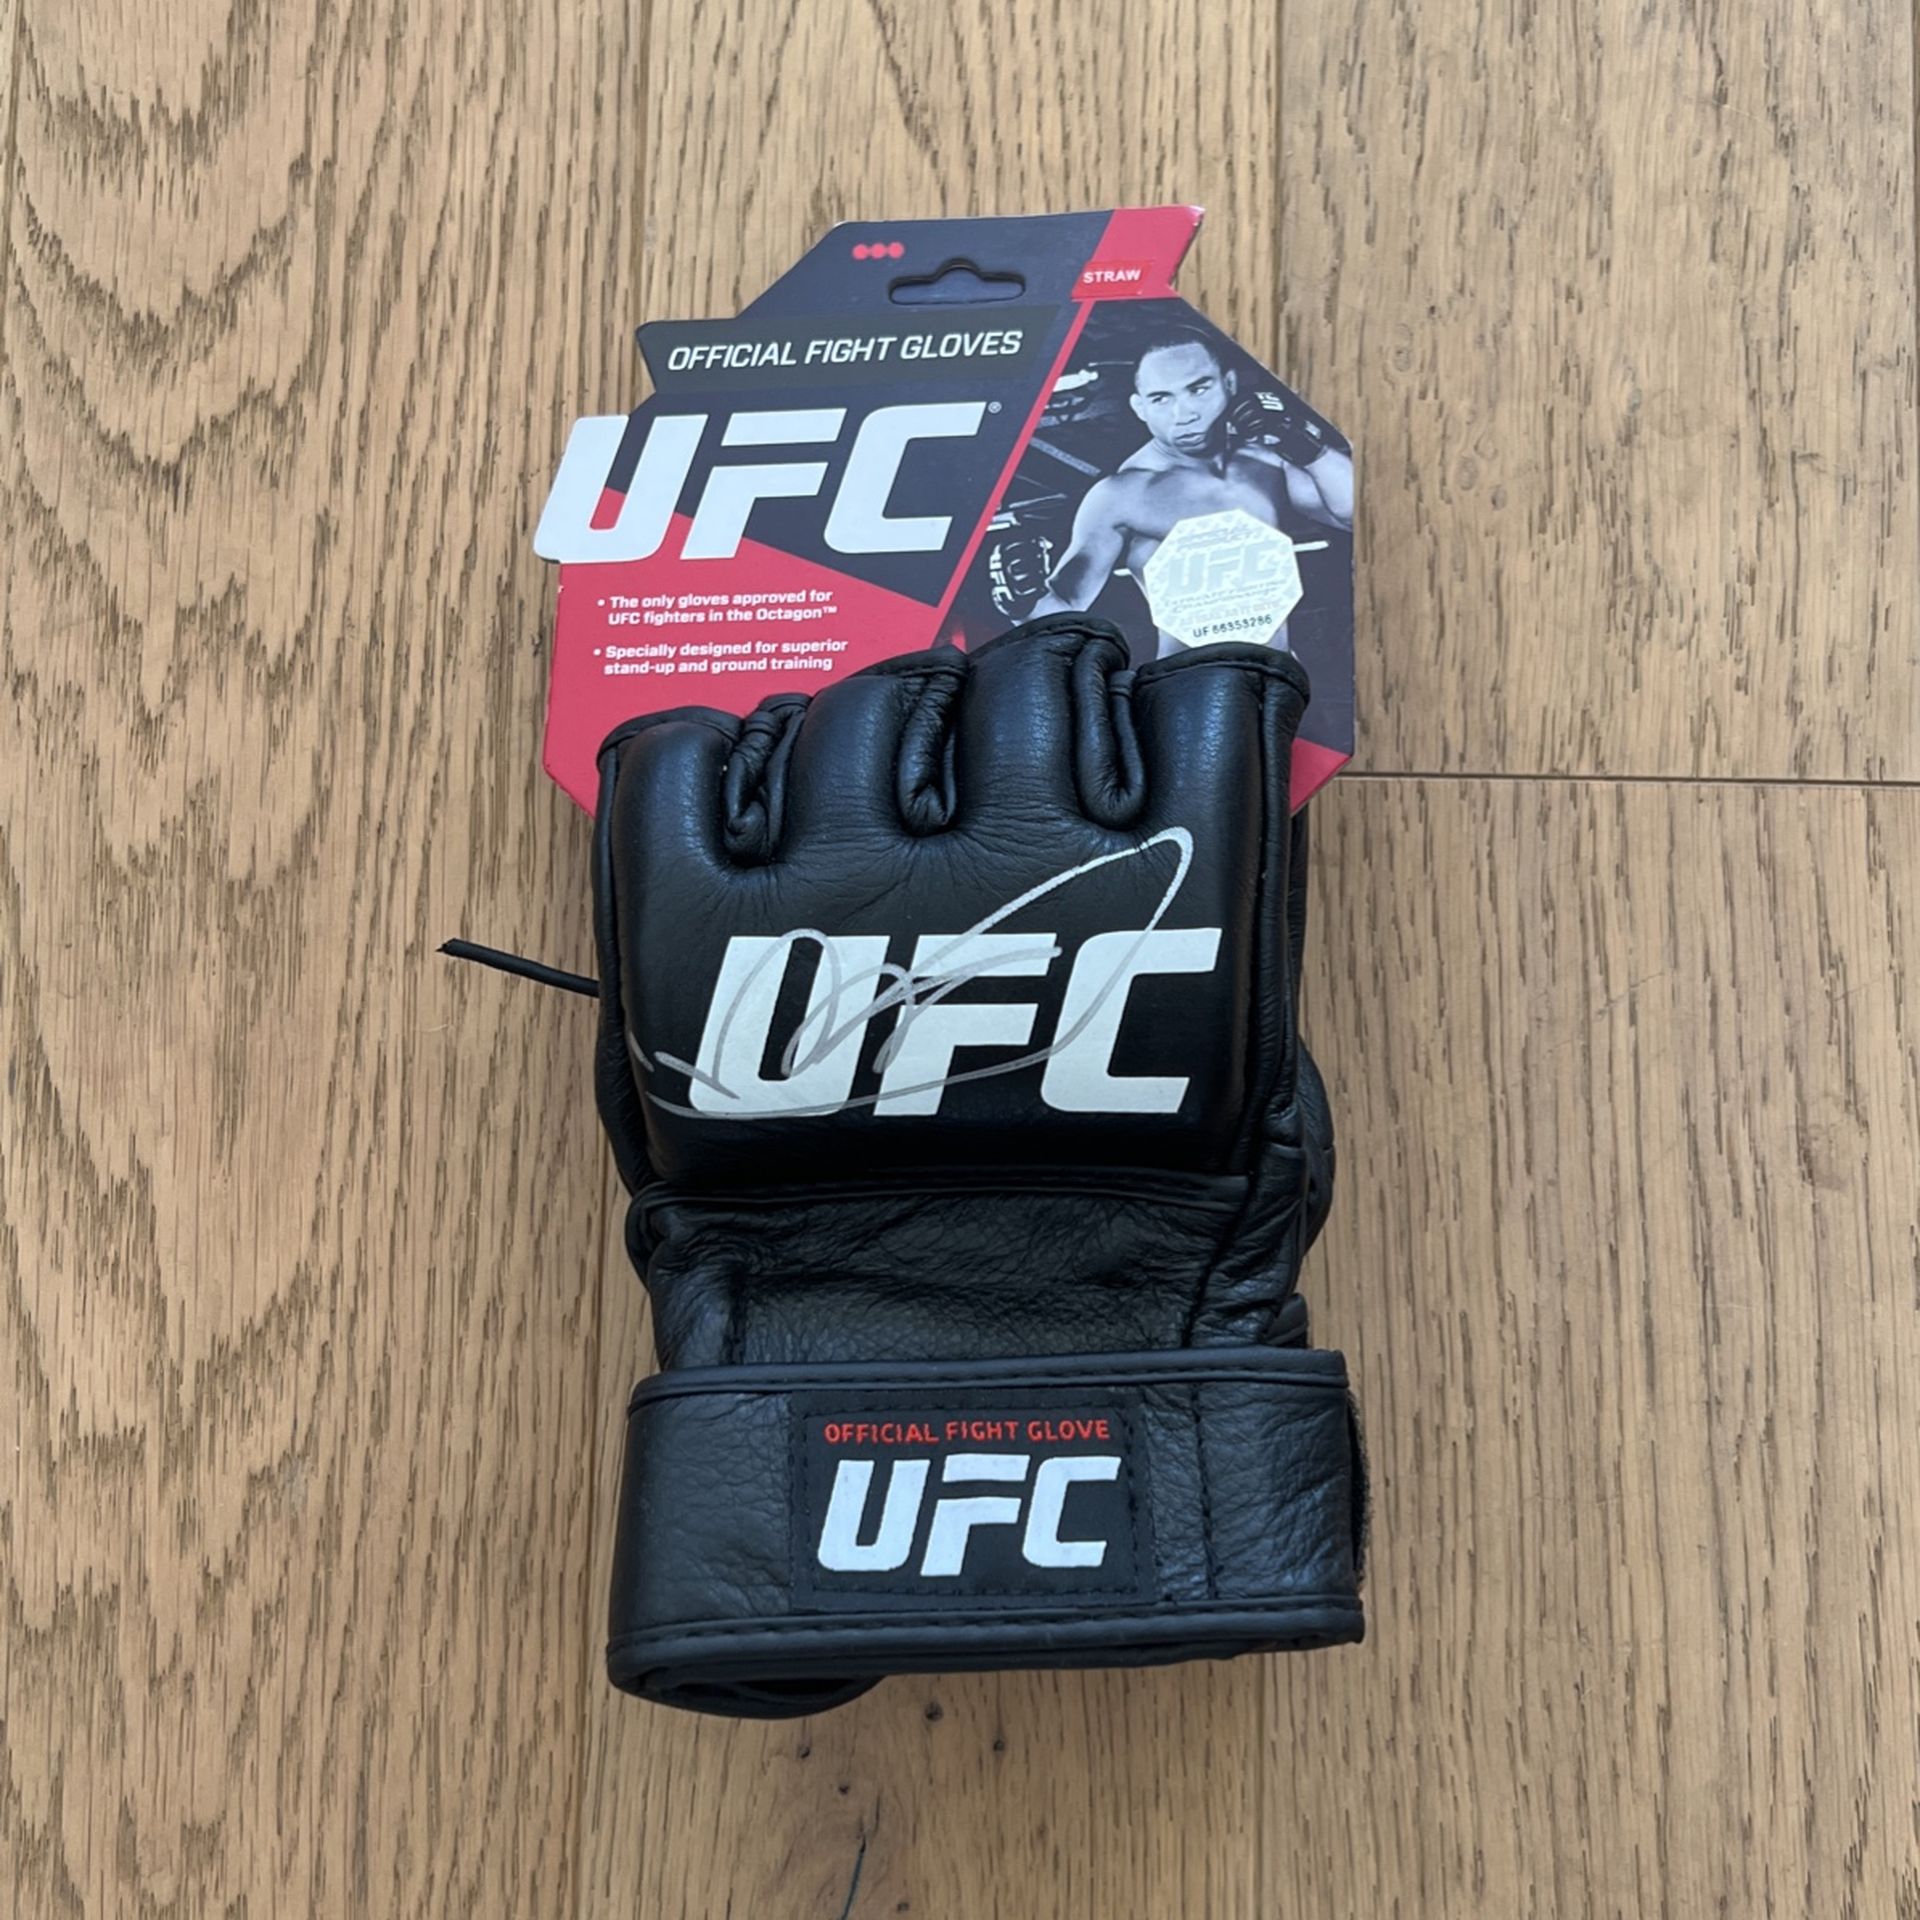 UFC MMA Official Fight gloves Autographed